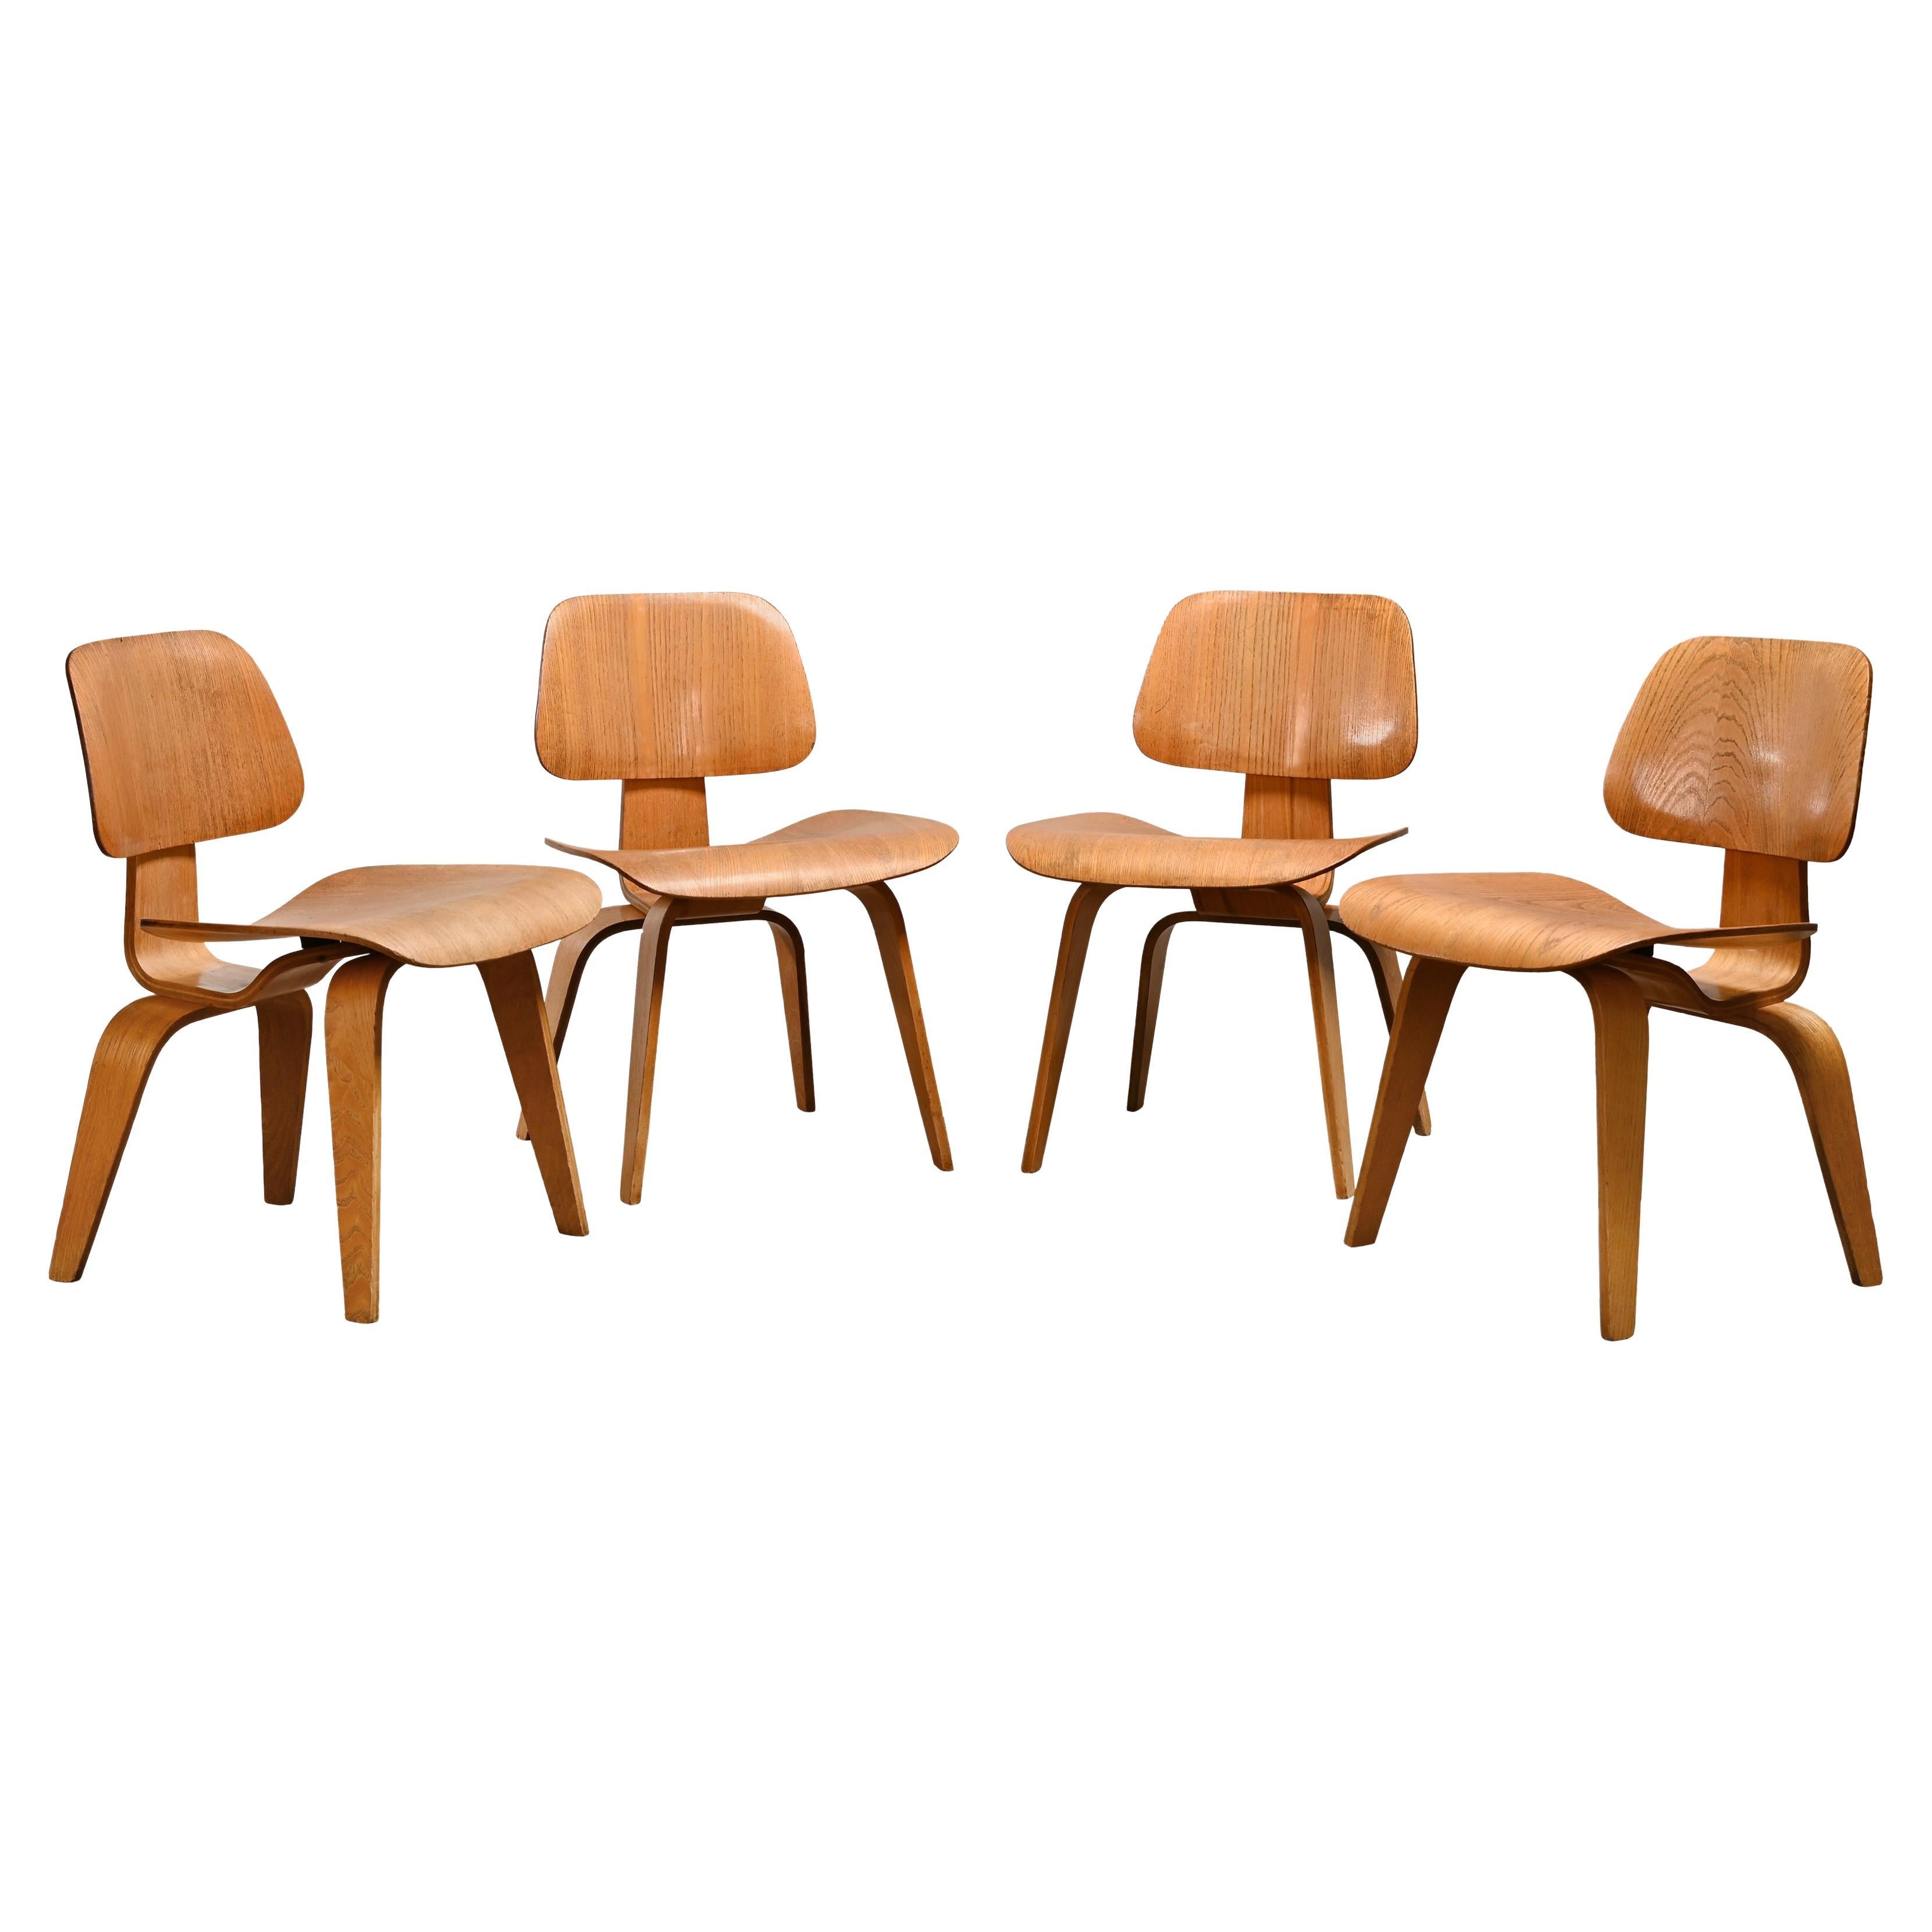 Charles and Ray Eames Early DCW Ash Plywood Dining Chairs for Herman Miller